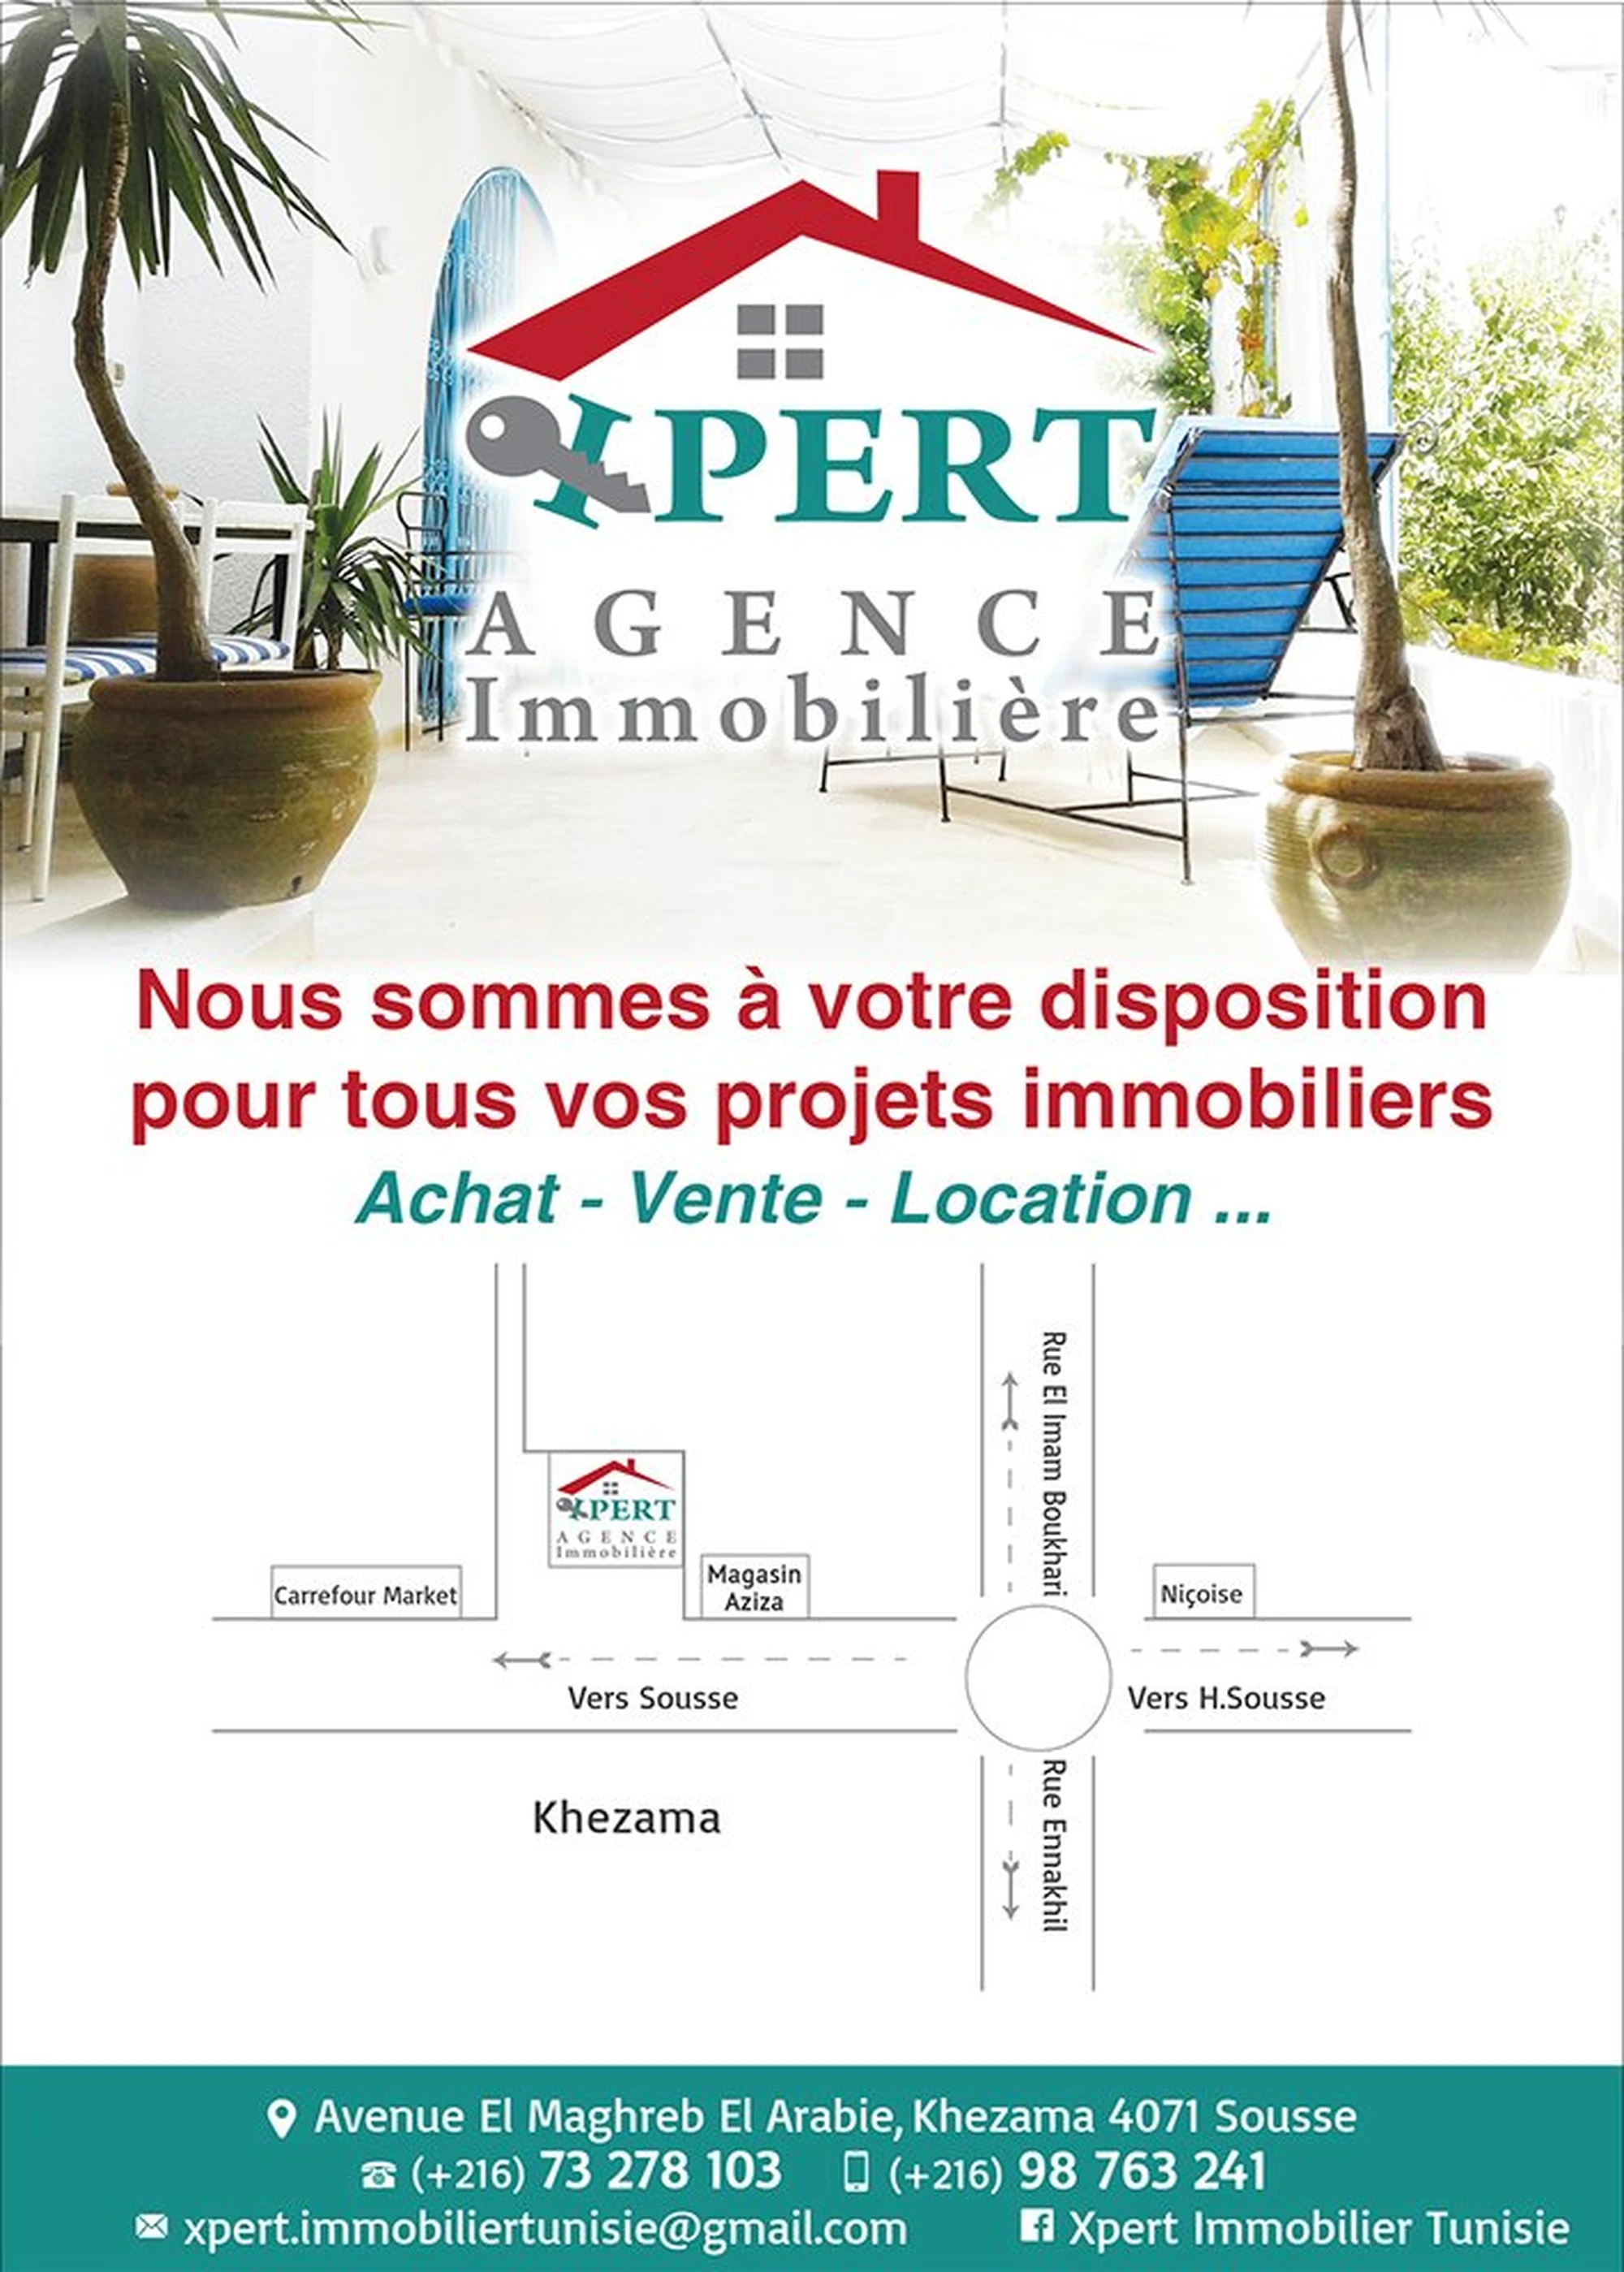 tayara shop cover of Xpert Immobilier Tunisie